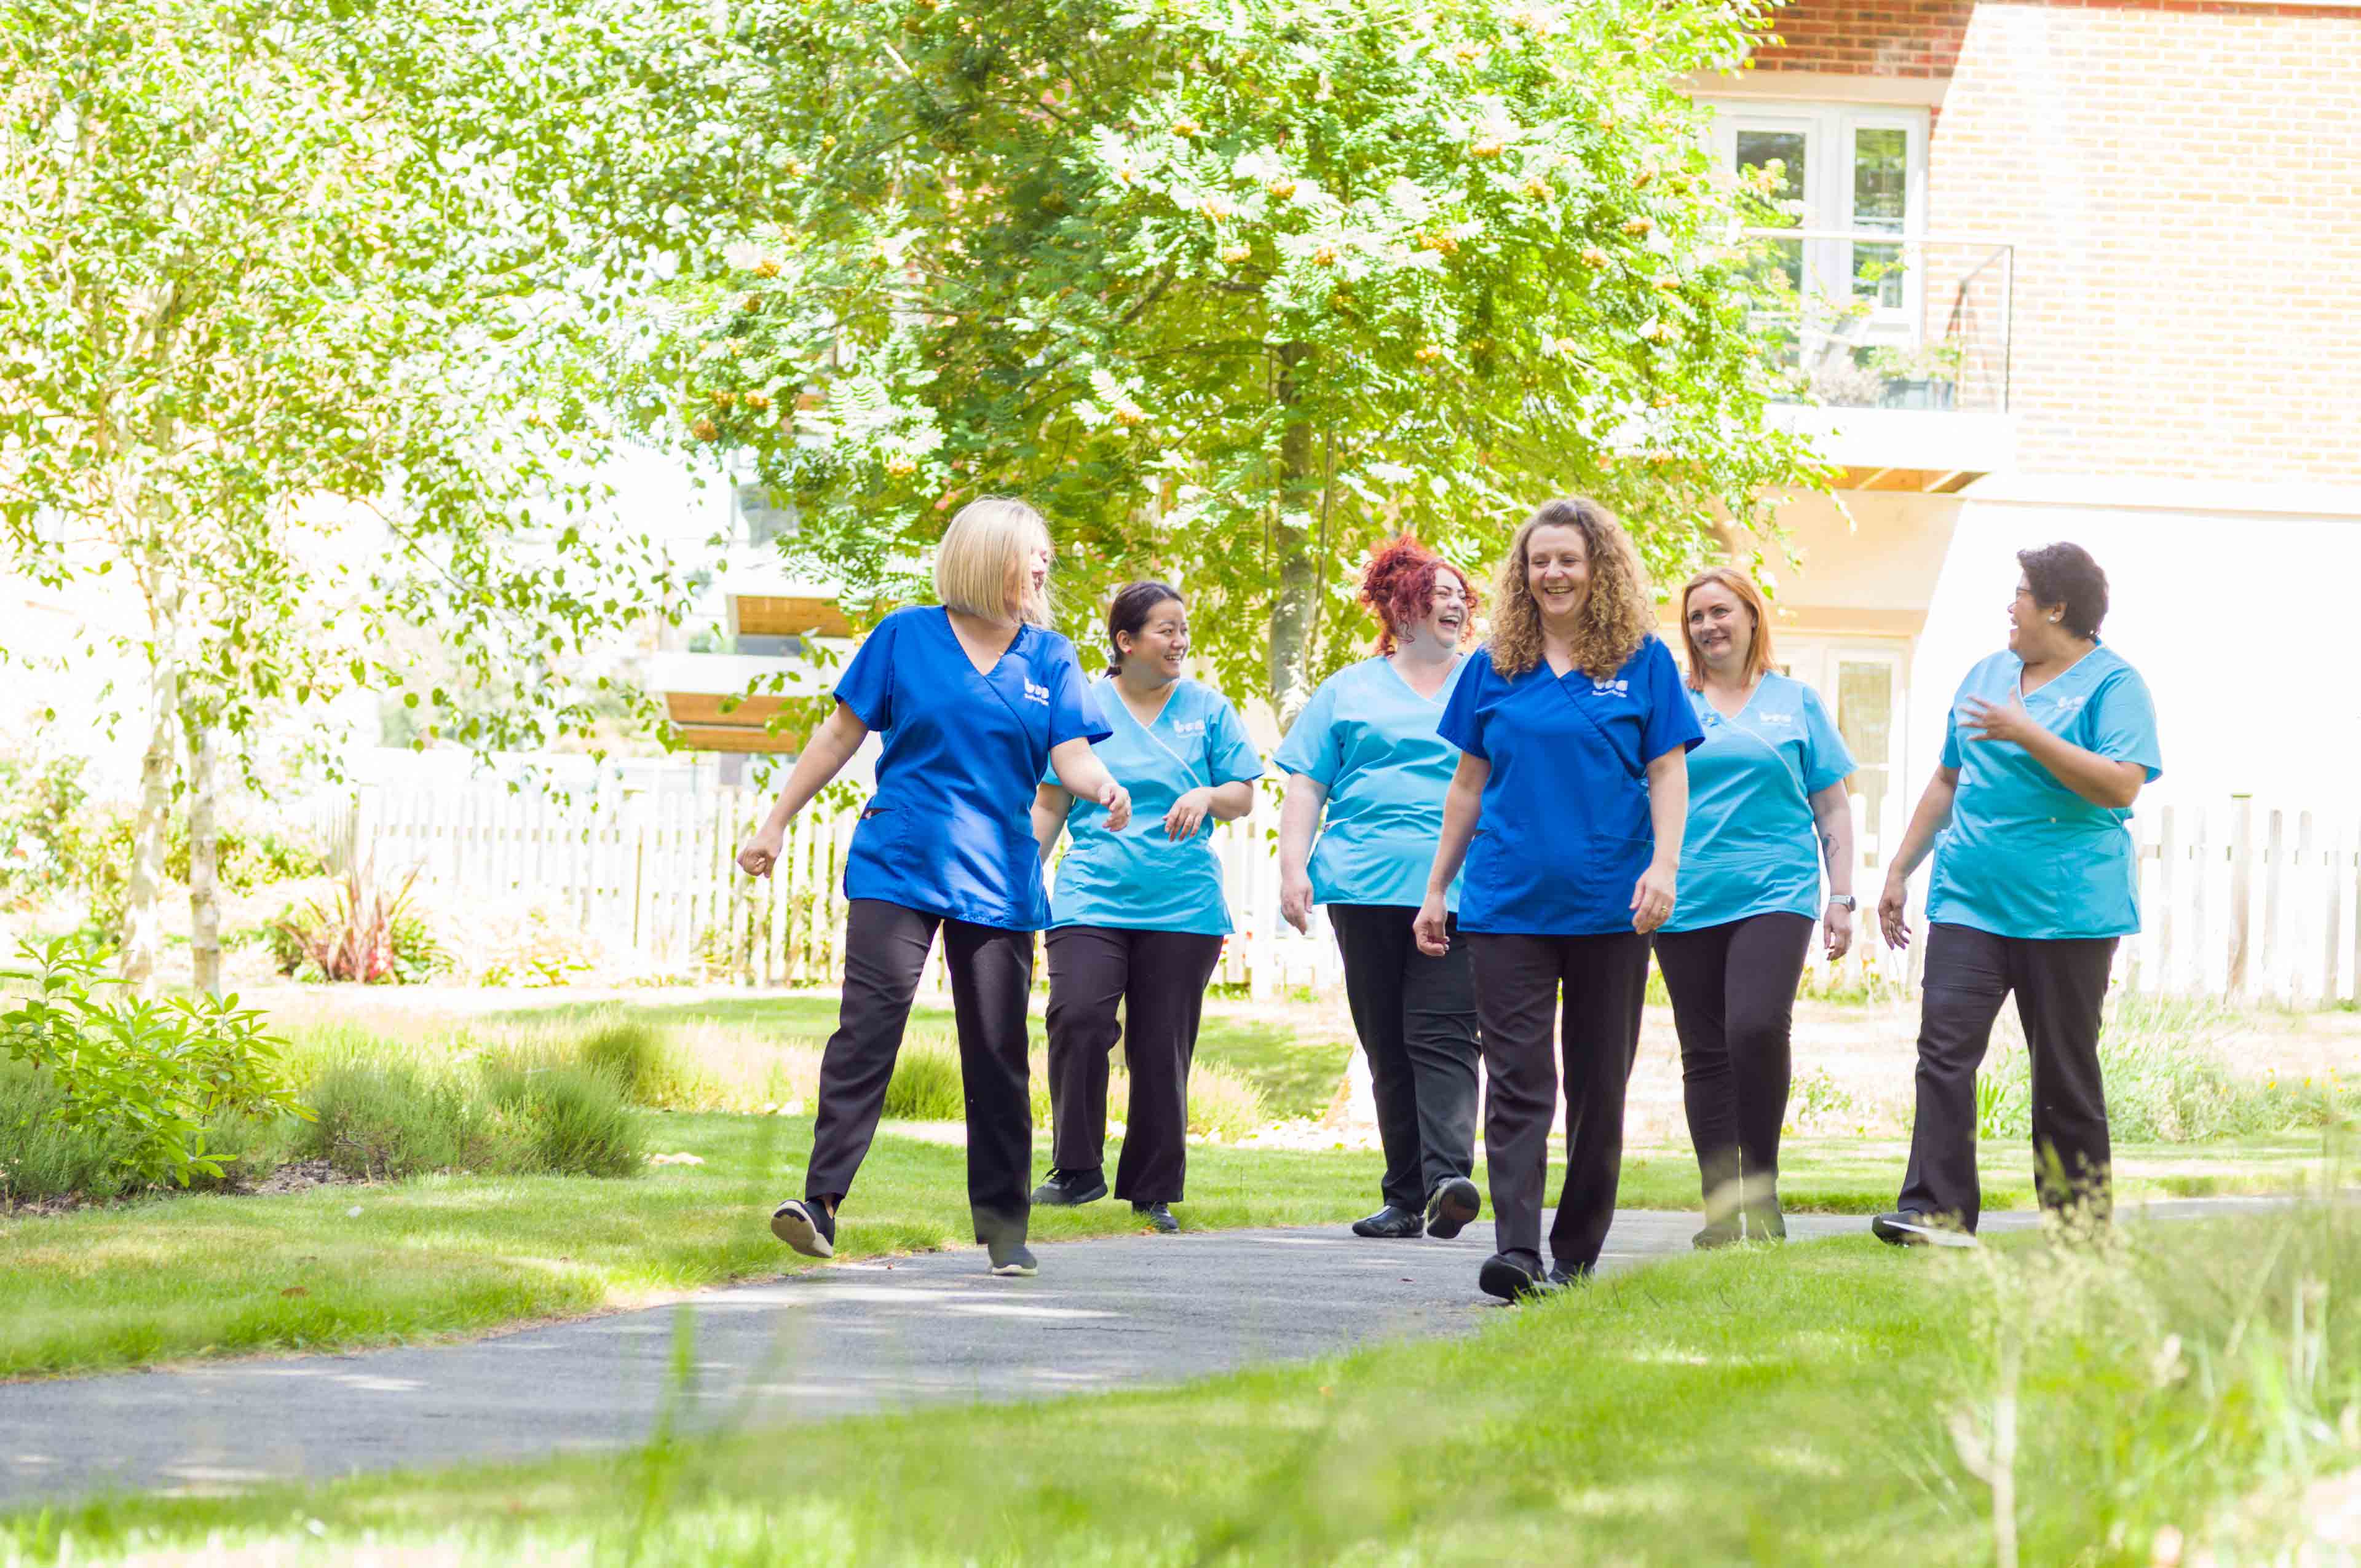 Jobs at LV Care Group  LV Care Group Careers